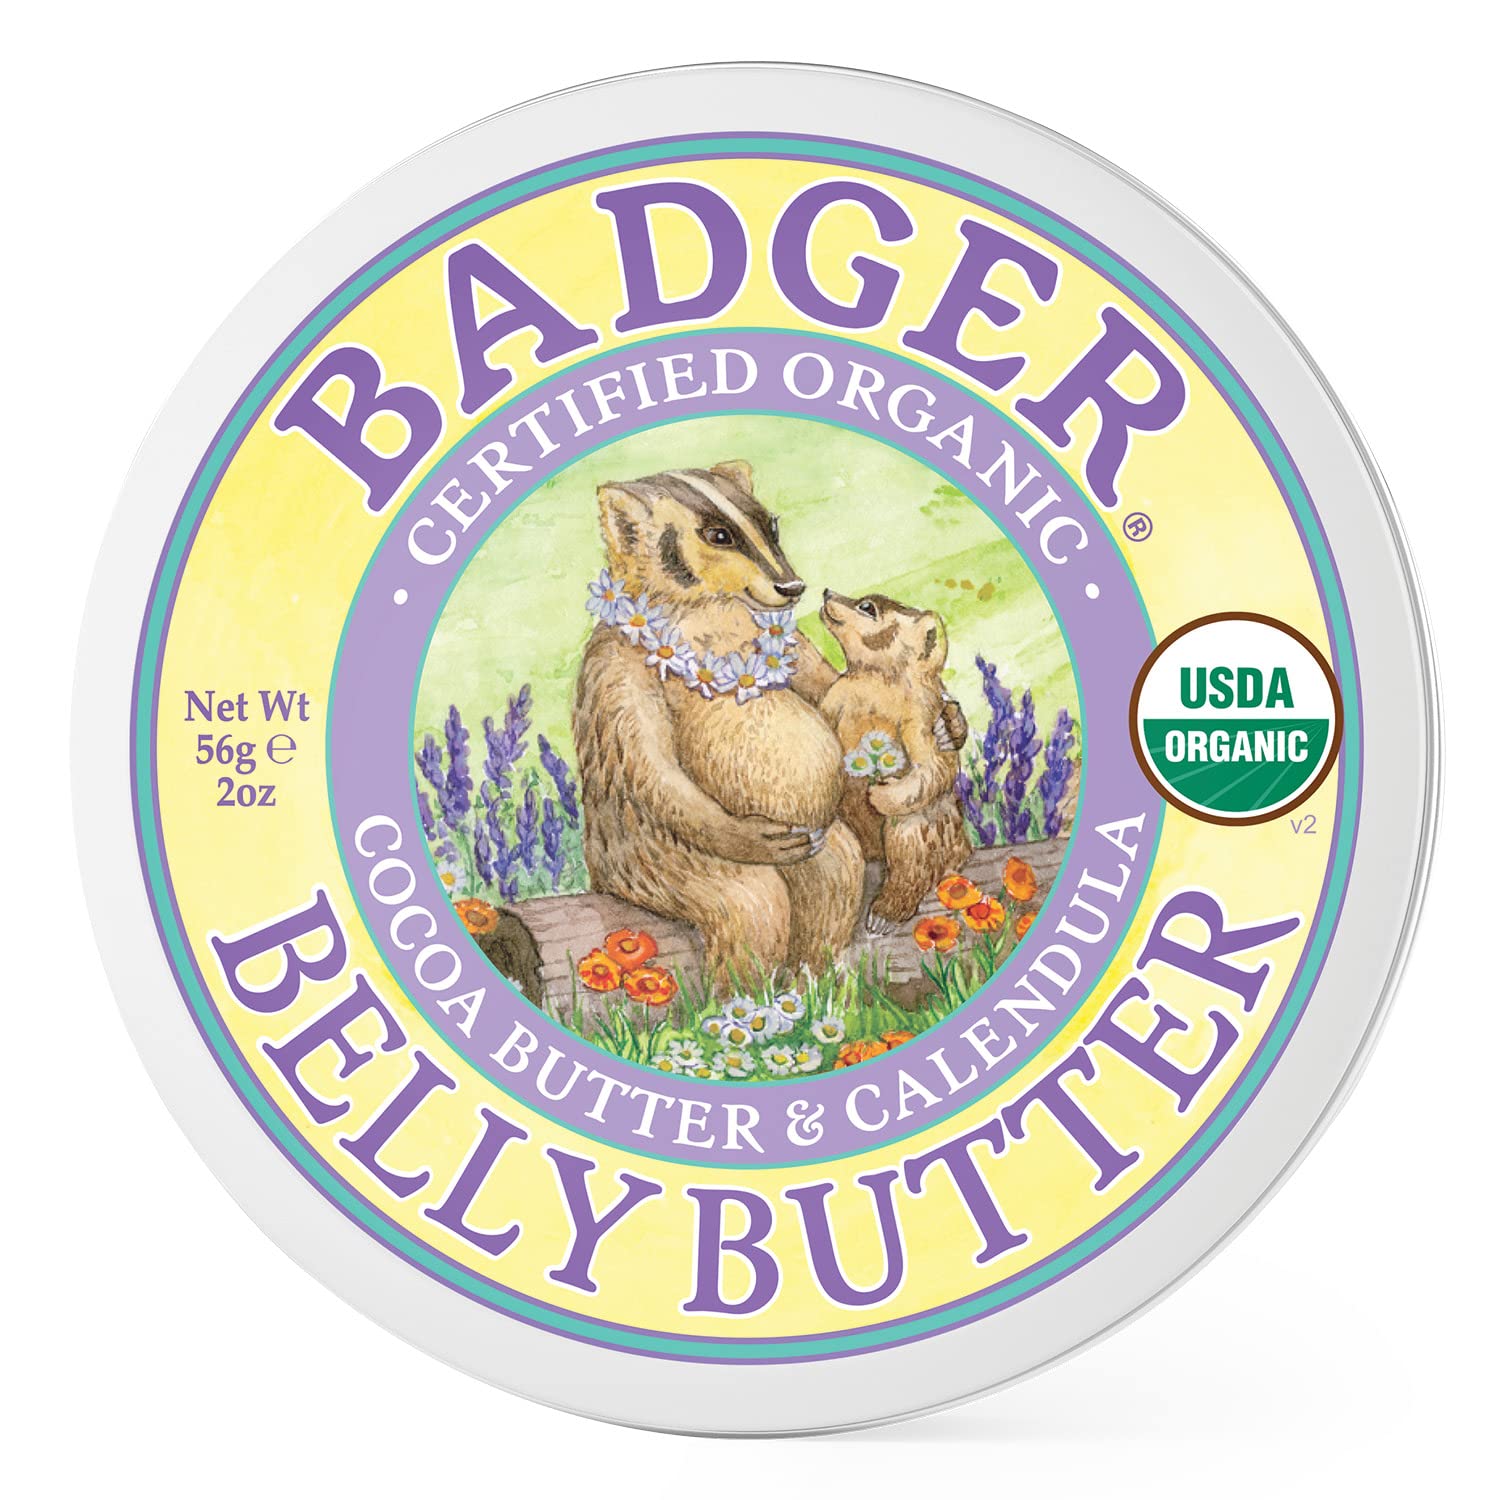 Badger - Belly Butter, Cocoa Butter & Calendula, Certified Organic Belly Butter, Vitamin E Belly Butter, Coconut Oil Belly Butter, Pregnant Belly Butter for Stretched Skin, 2 oz